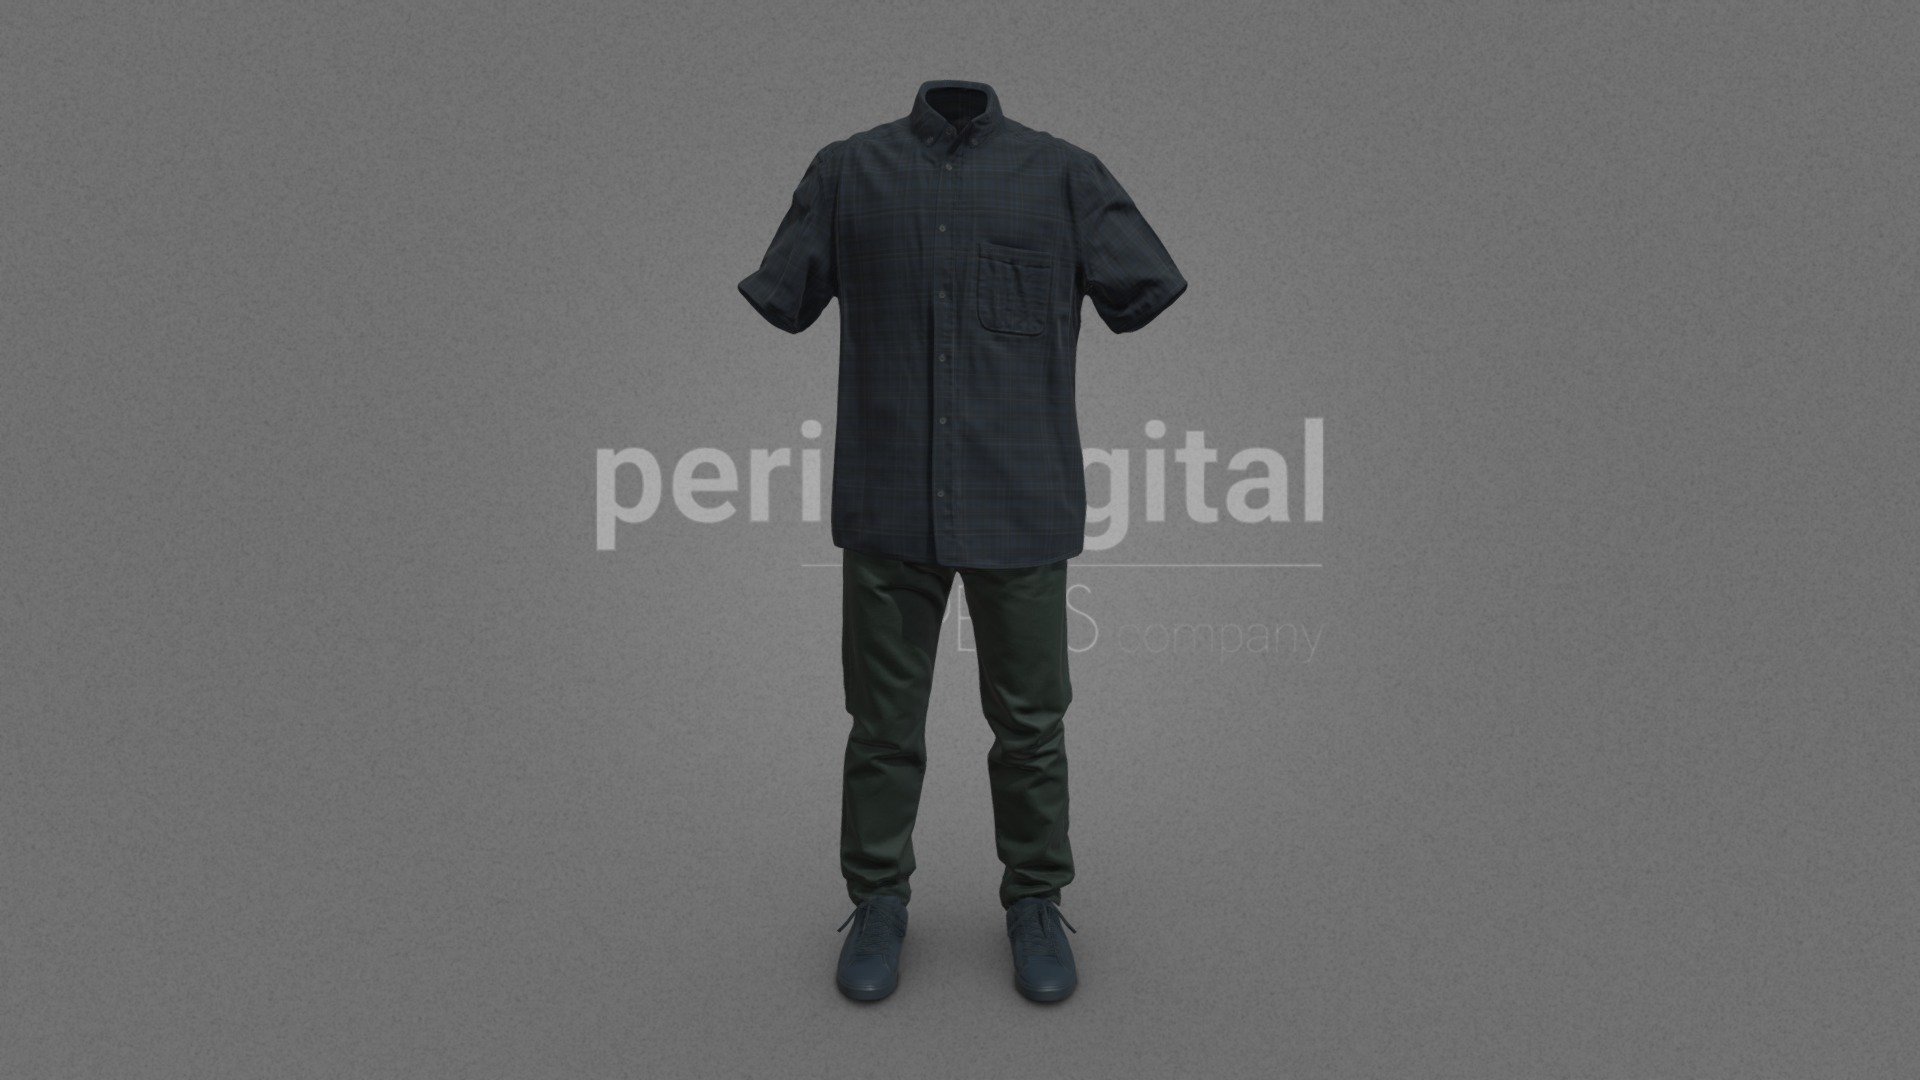 Dark blue short sleeve tartan shirt, dark green regular denim trousers, gray sneakers with knotted laces.


PERIS DIGITAL HIGH QUALITY 3D CLOTHING



They are optimized for use in medium/high poly 3D scenes and optimized for rendering.

We do not include characters, but they are positioned for you to include and adjust your own character.

They have a LOW Poly Mesh (LODRIG) inside the Blender file (included in the AdditionalFiles), which you can use for vertex weighting or cloth simulation and thus, make the transfer of vertices or property masks from the LOW to the HIGH model.

We have included in AddiotionalFiles, the texture maps in high resolution, as well as the Displacement maps in high resolution too, so you can perform extreme point of view with your 3D cameras.

With the Blender file (included in AdditionalFiles) you will be able to edit any aspect of the set .

Enjoy it!

Web: https://peris.digital/ - Daily Clothing - Green Pants - Buy Royalty Free 3D model by Peris Digital (@perisdigital) 3d model